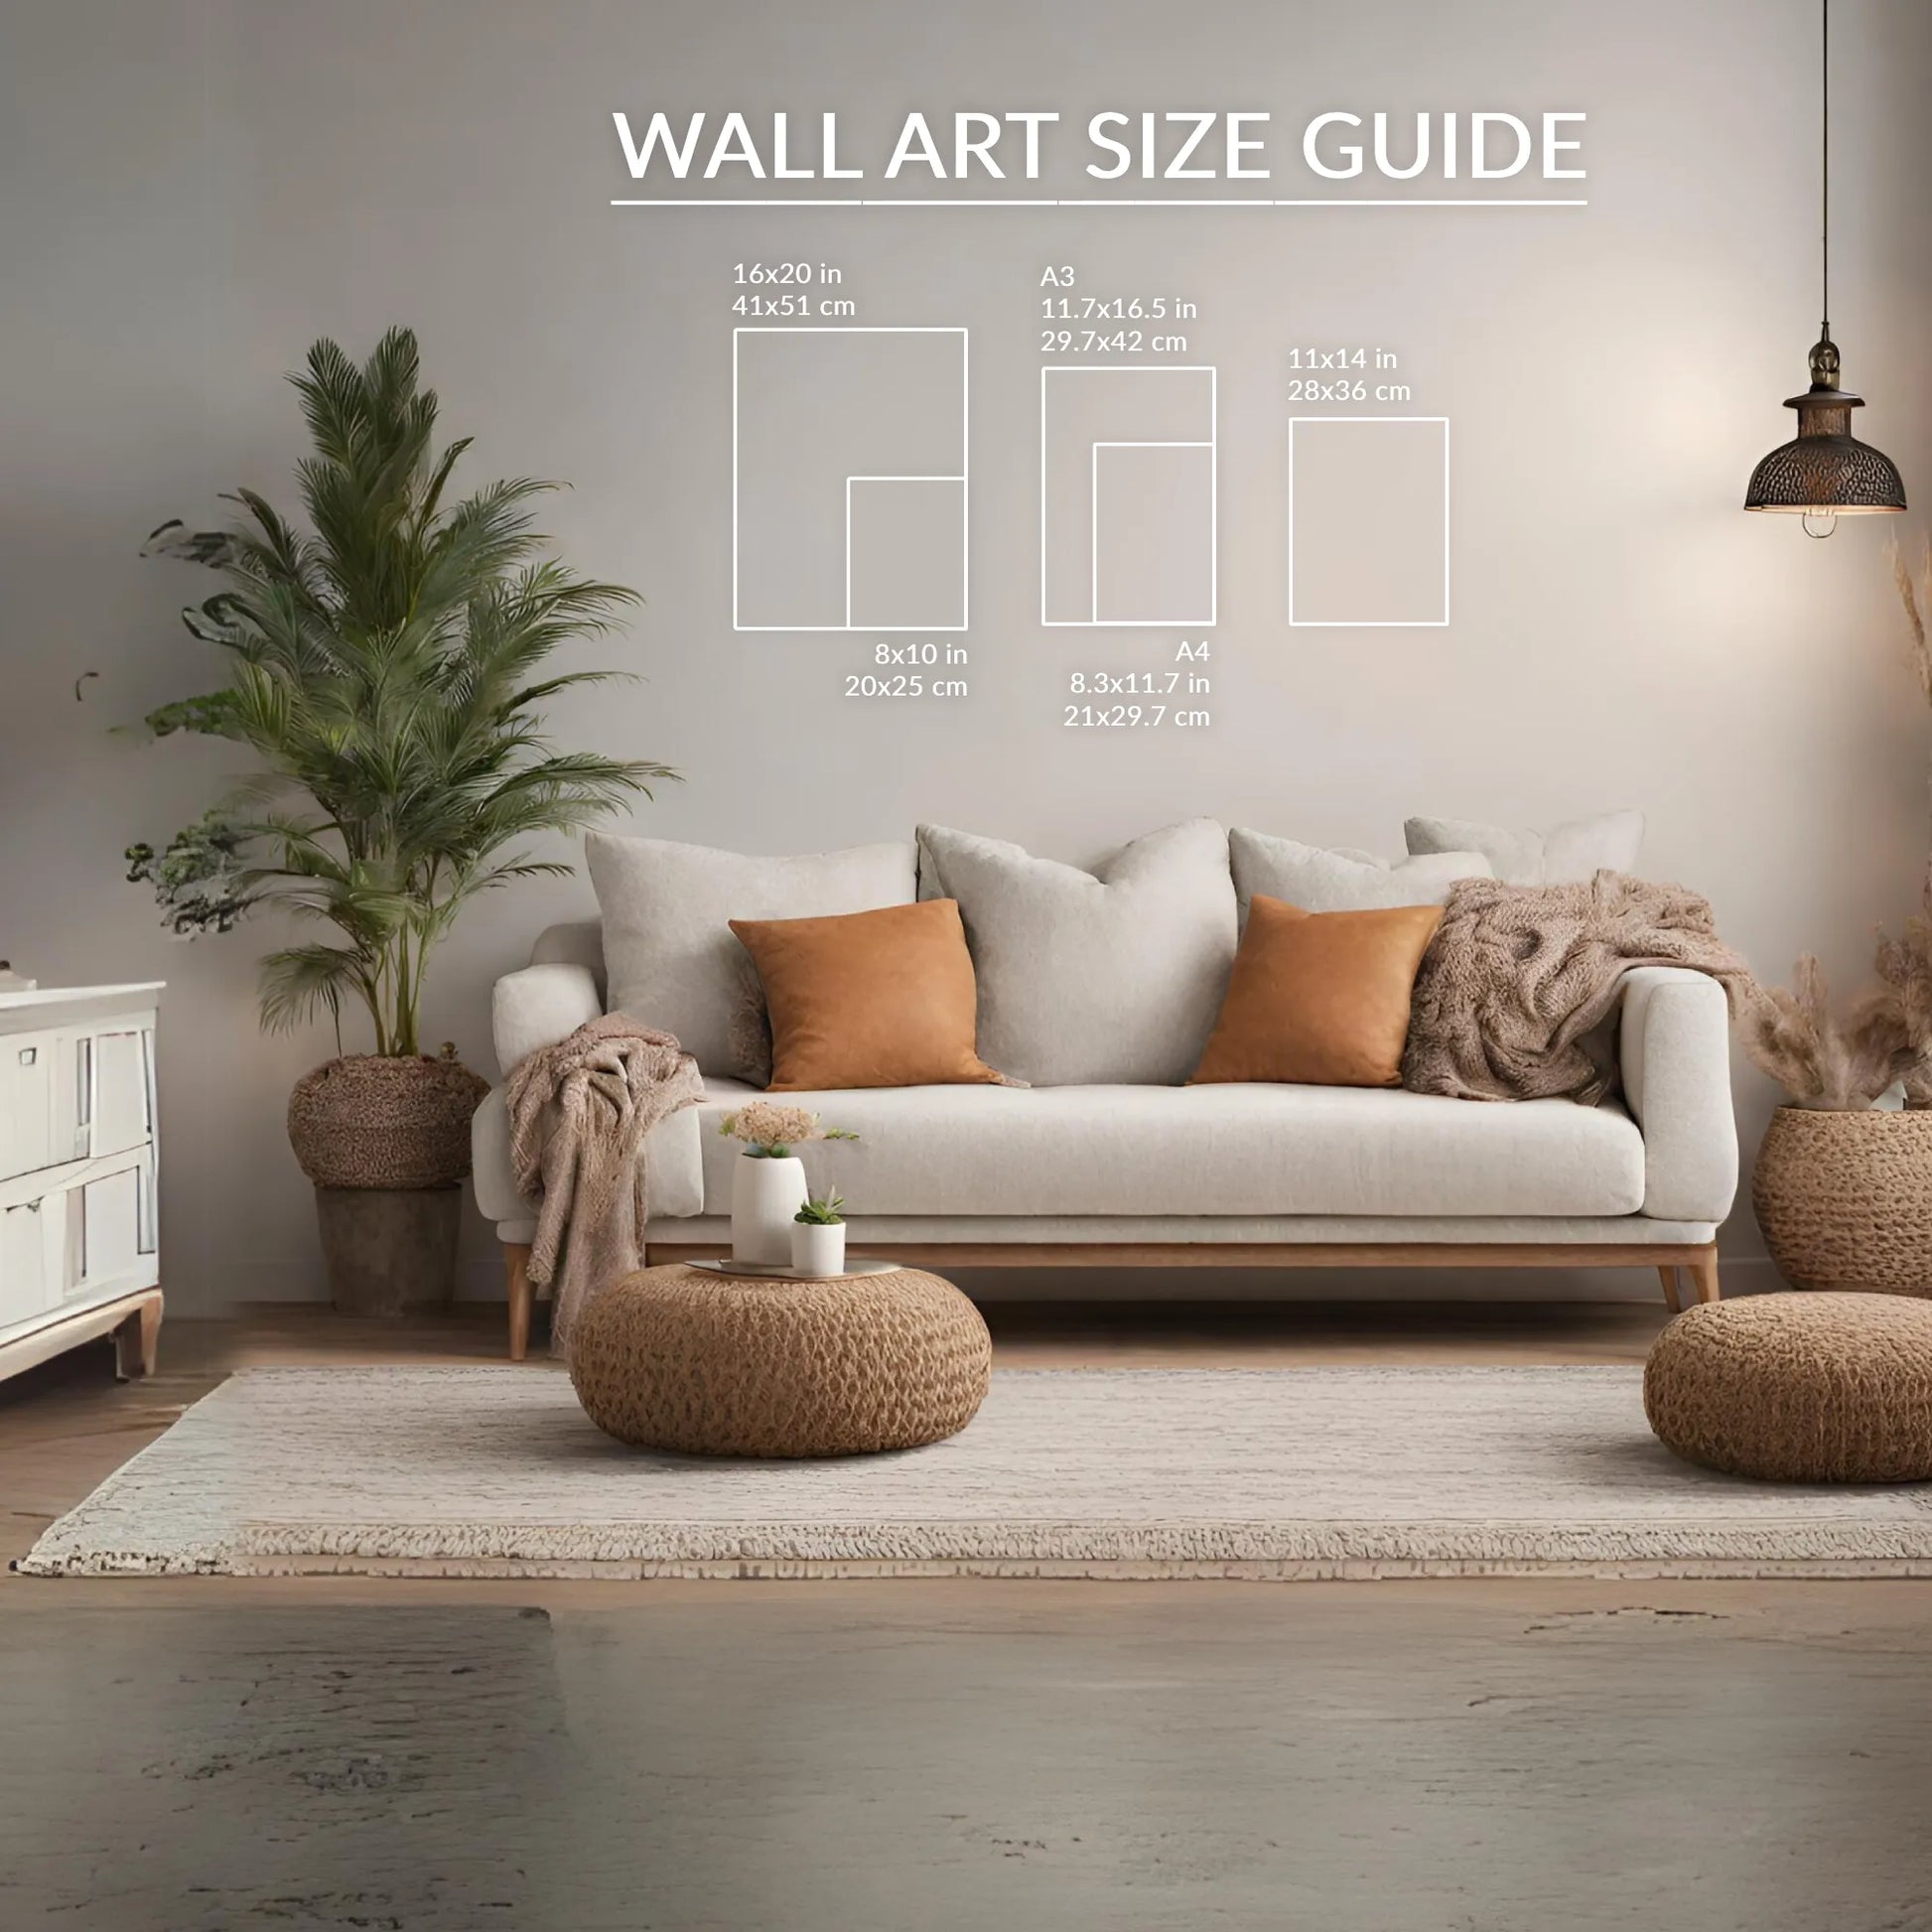 Custom Picture Collage Template Wall Art Size Guide